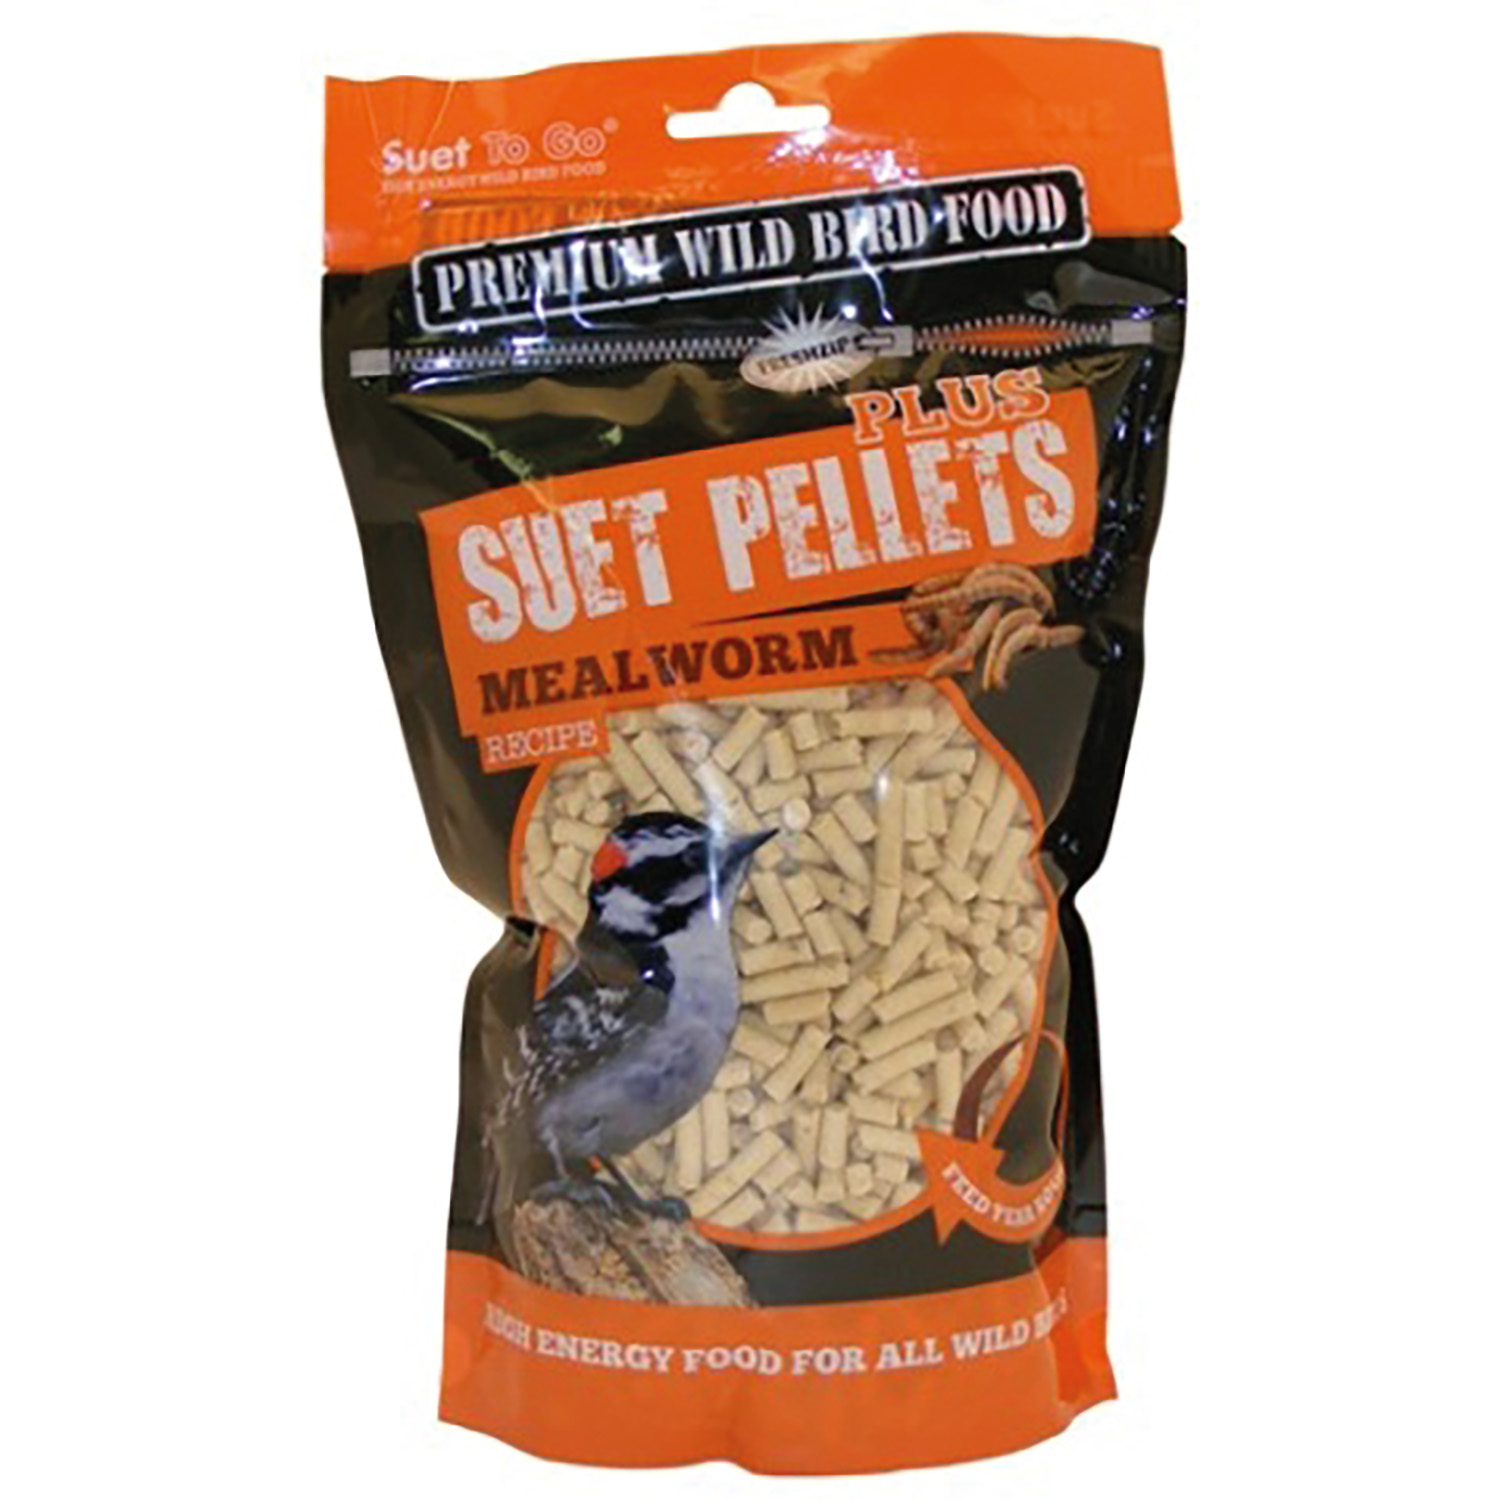 SUET TO GO SUET PELLETS MEALWORM 550 GM POUCH MEALWORM